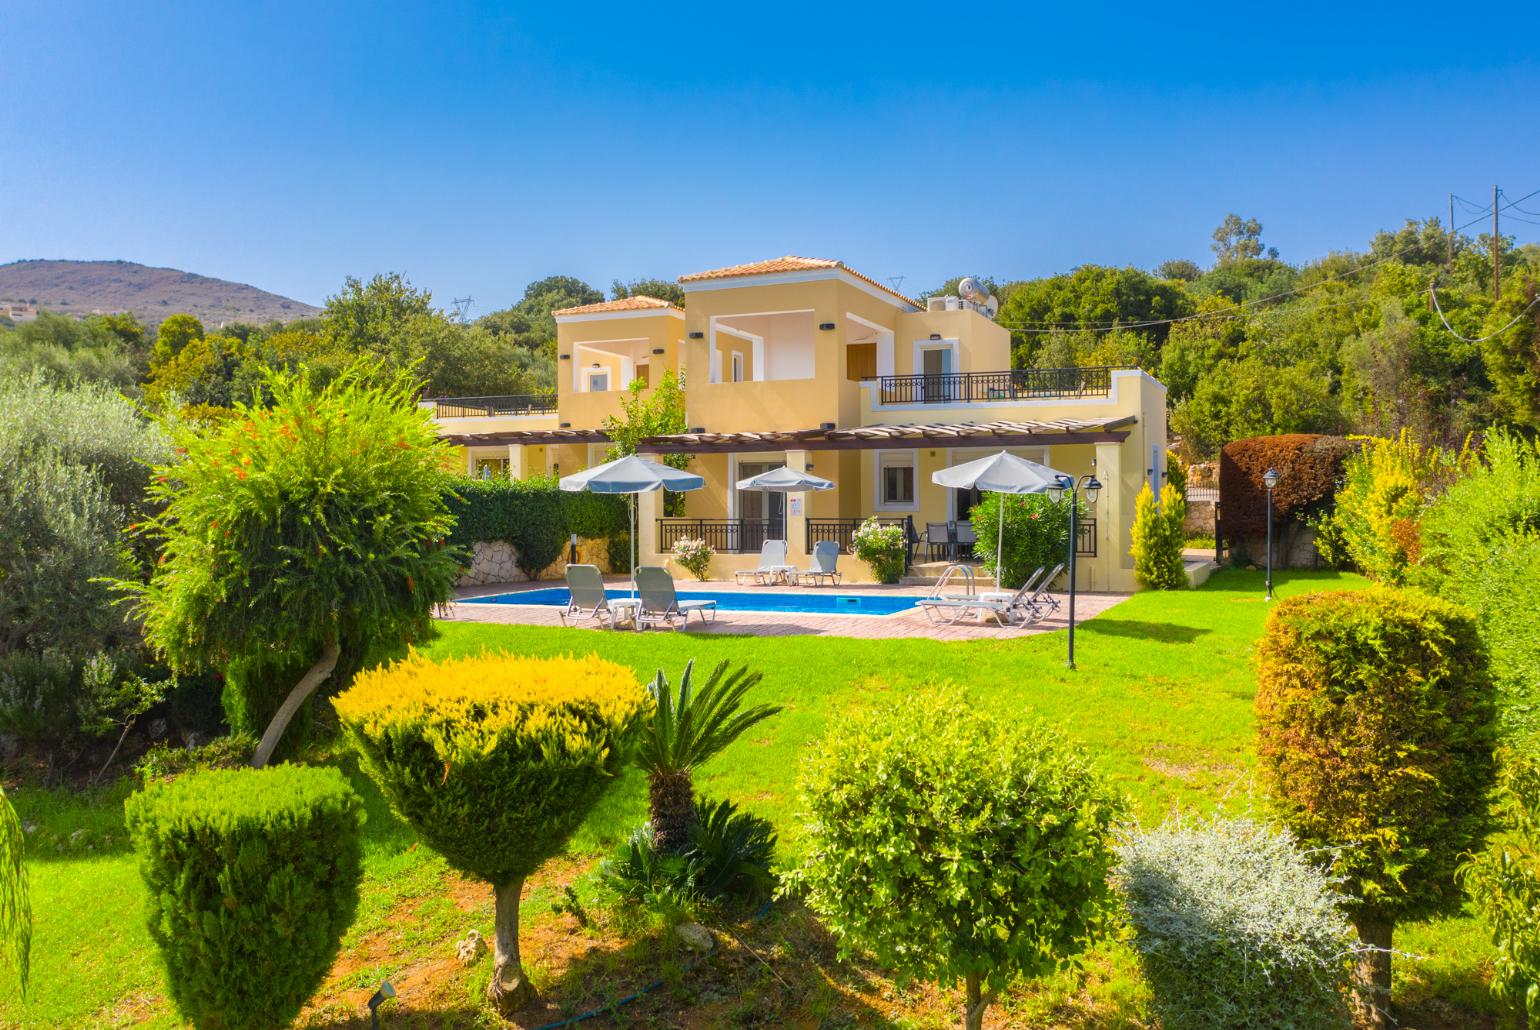 Beautiful villa with private pool, terrace area, and large garden